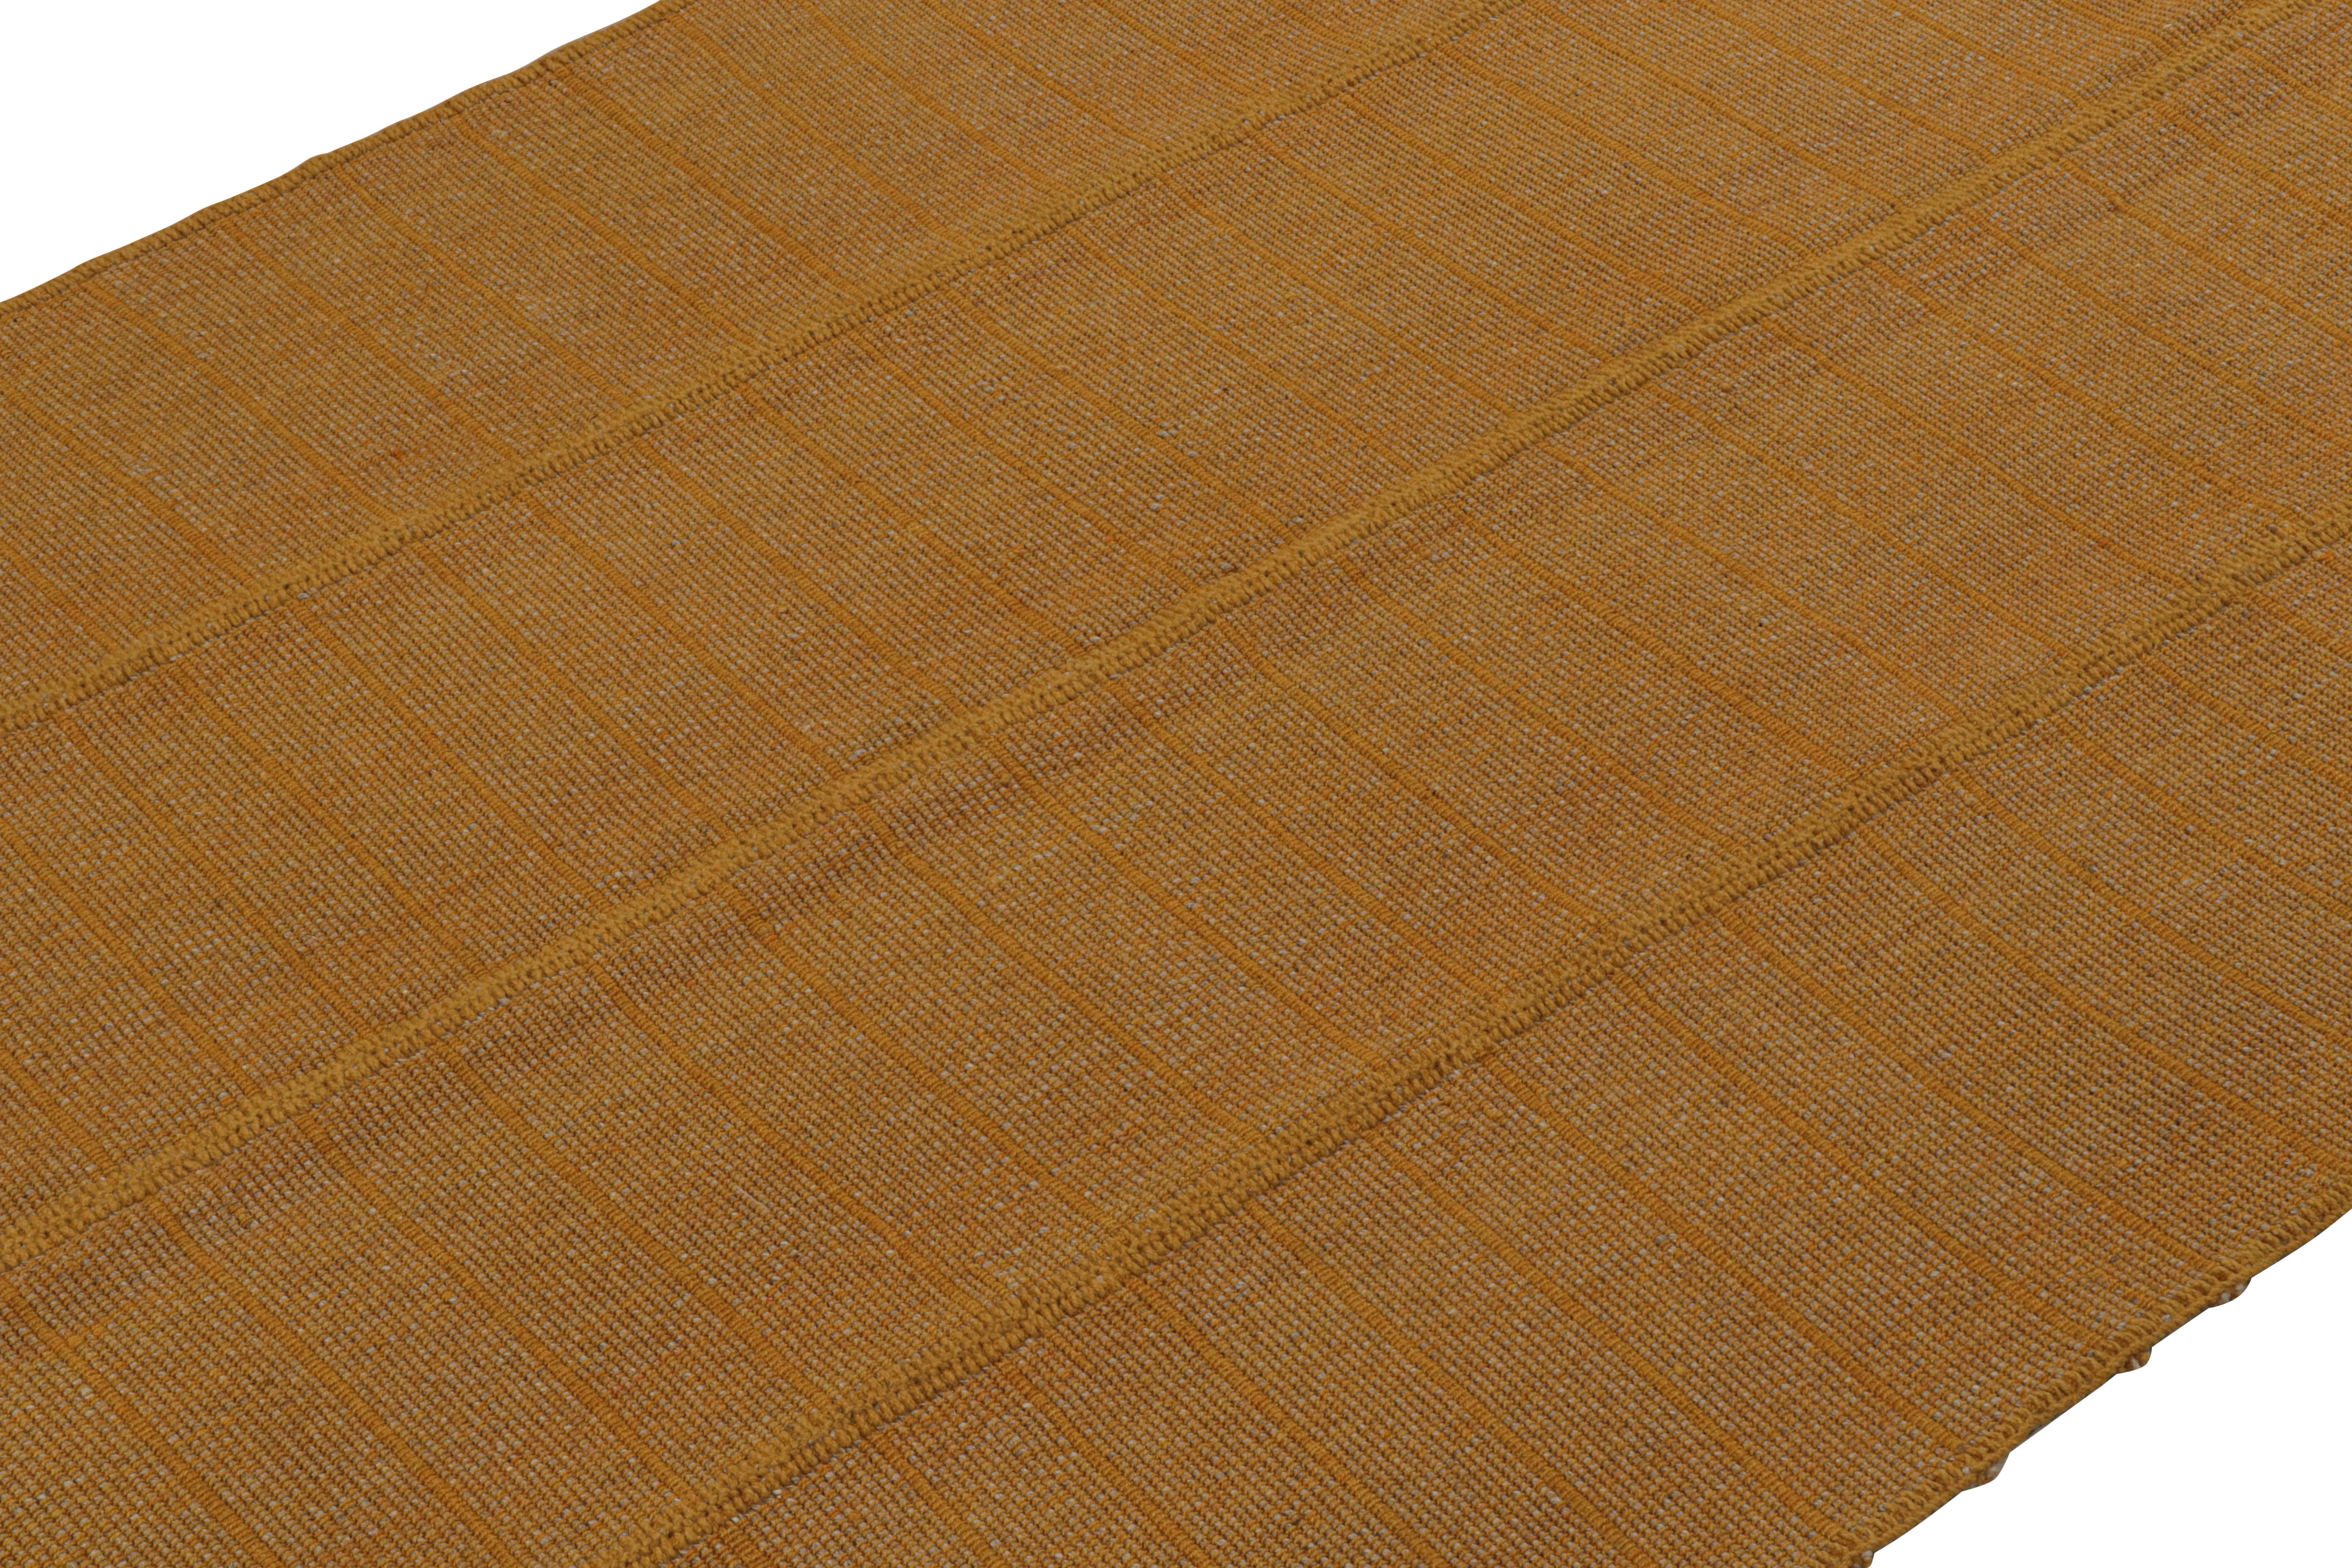 Hand-Woven Rug & Kilim’s Modern Kilim Rug with Textural Stripes in Gold and Orange Tones For Sale